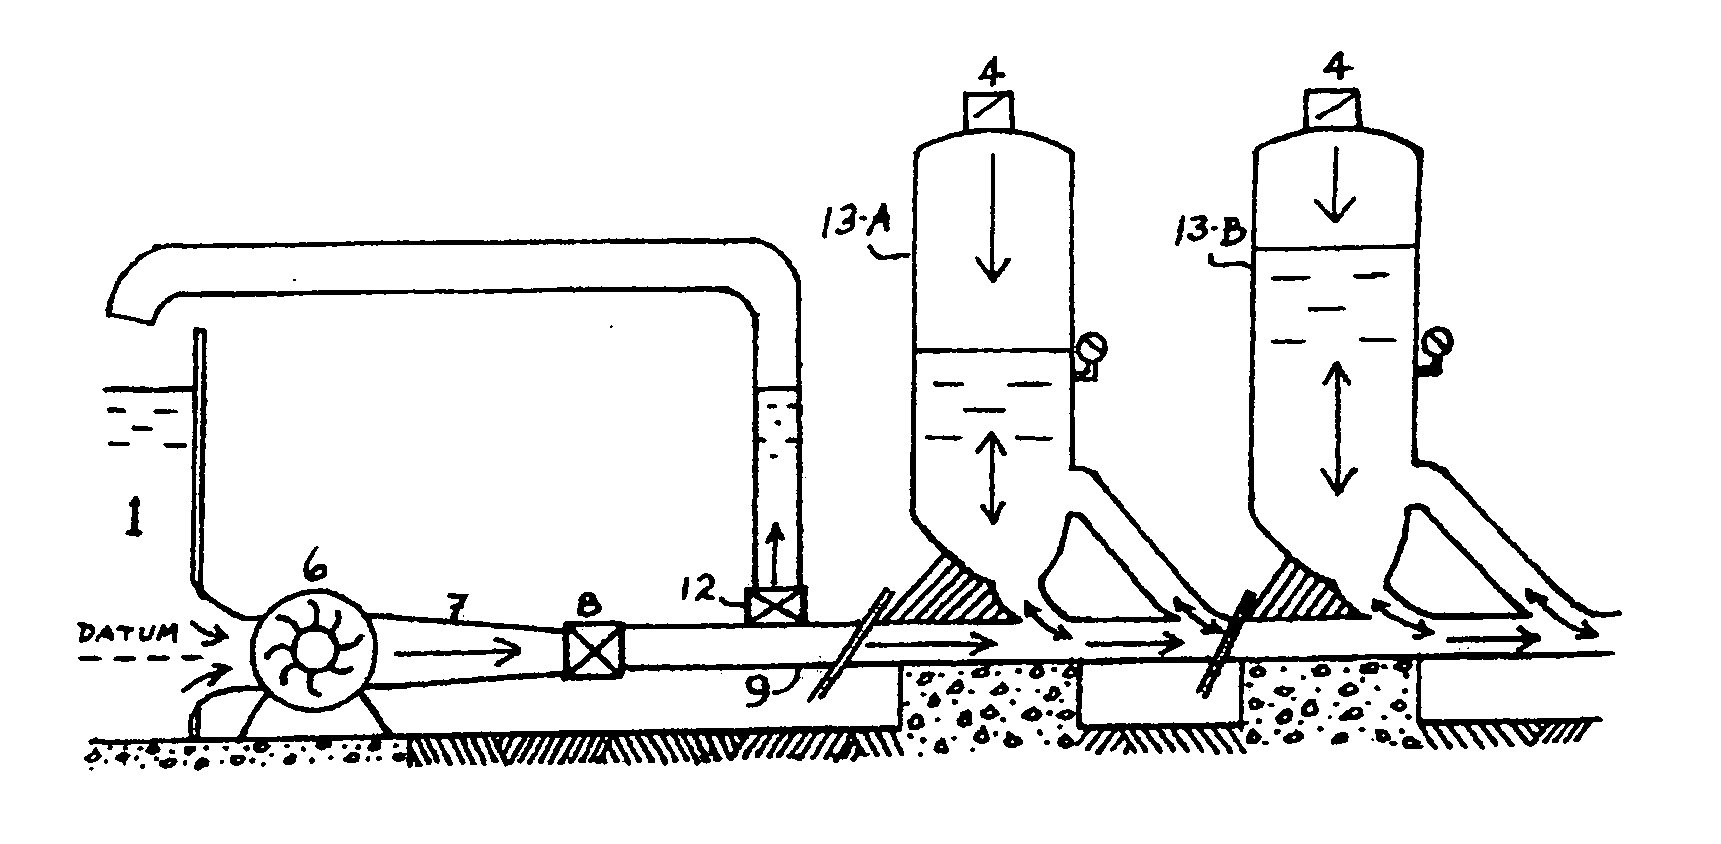 Multiple energy inputs hydropower system